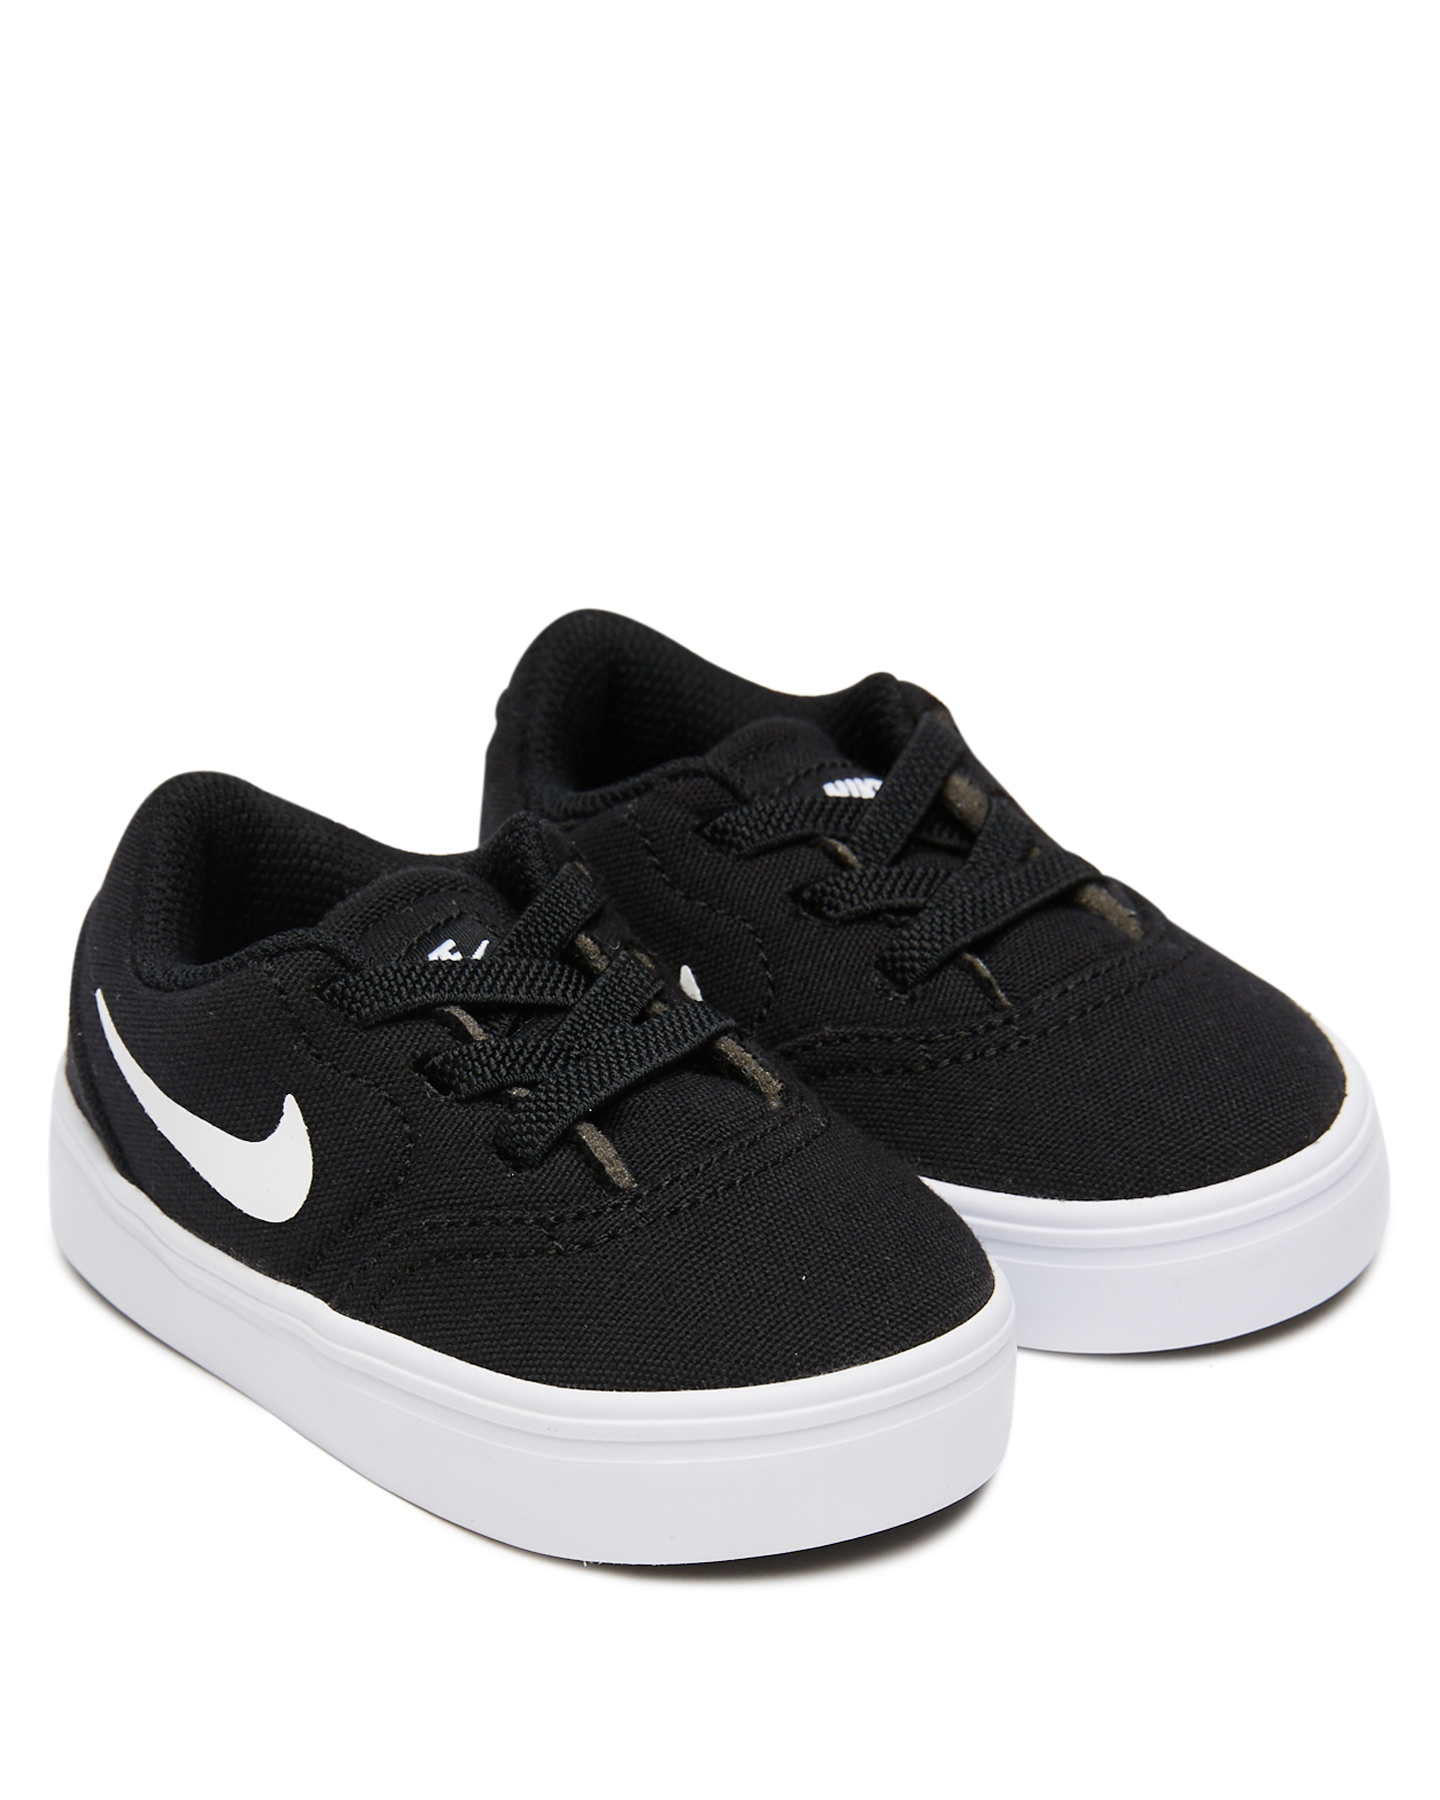 black and white nike shoes for kids